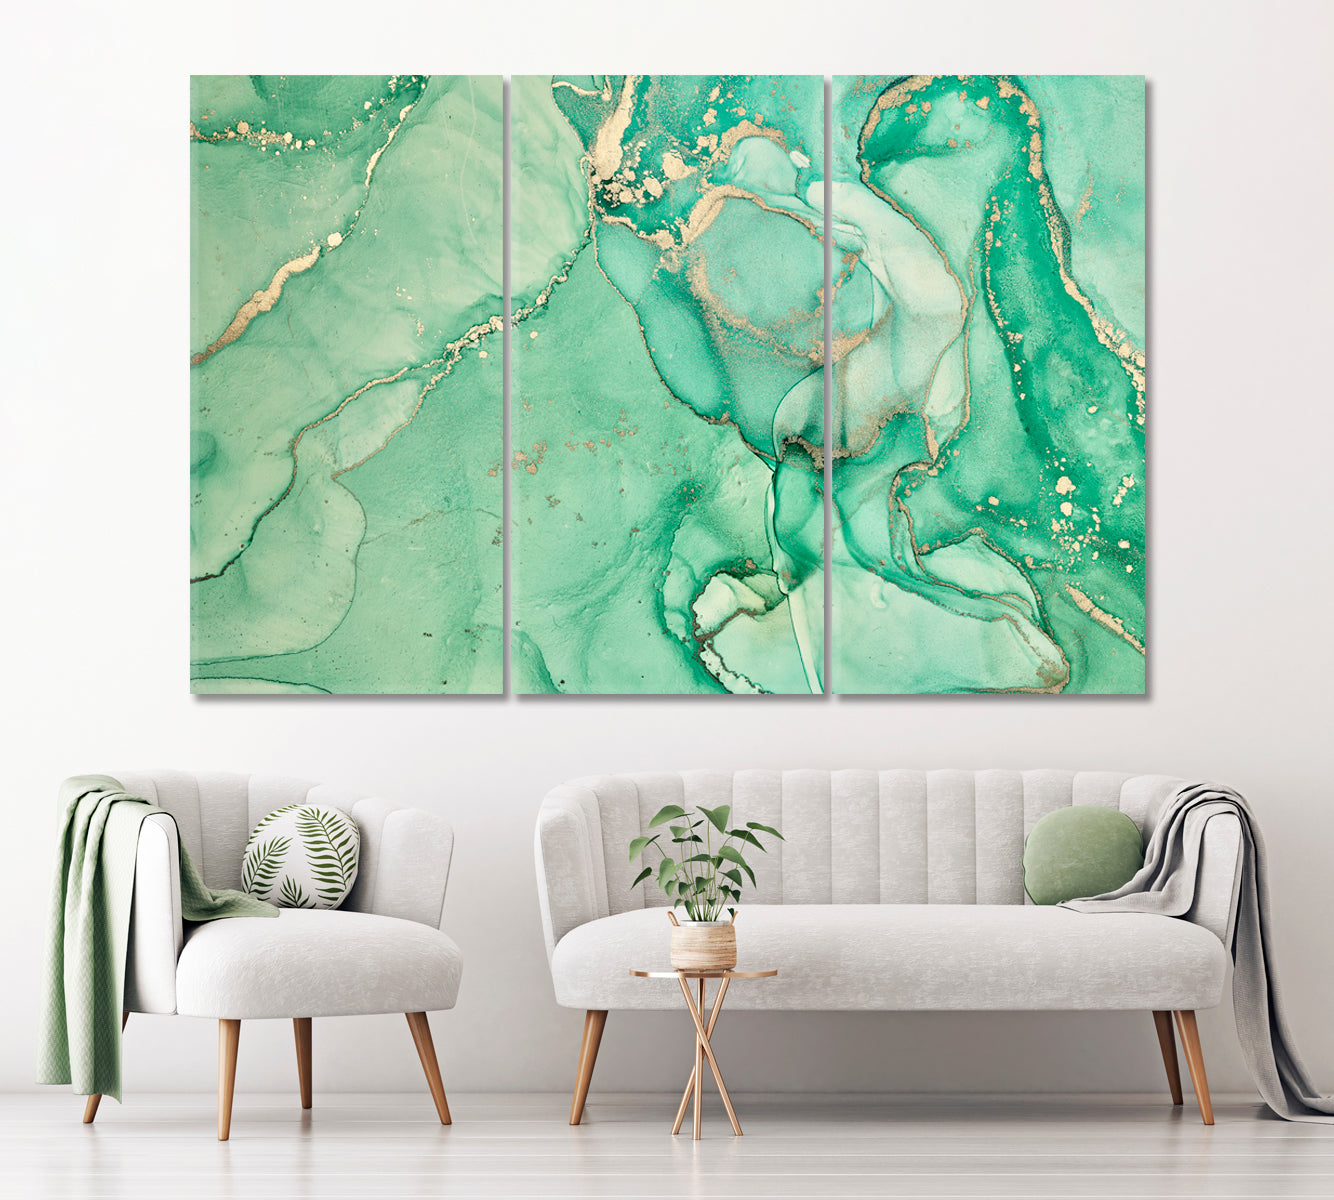 Modern Green Abstract Composition Canvas Print ArtLexy 3 Panels 36"x24" inches 